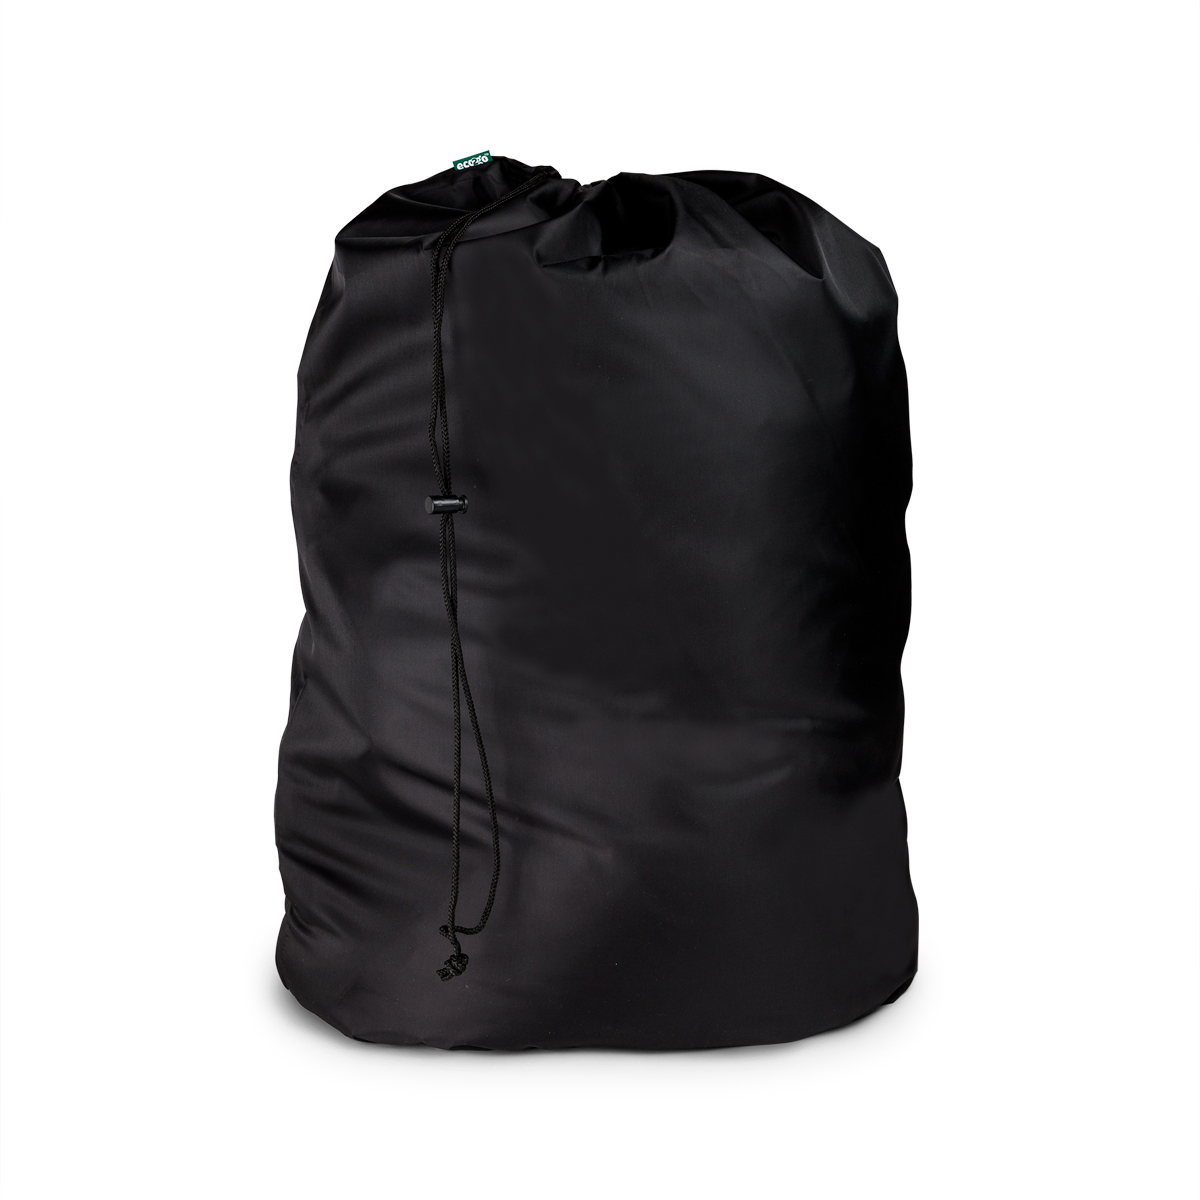 eco2go Heavy-Weight Water-Resistant Laundry Bags - 30 x 40 - Black